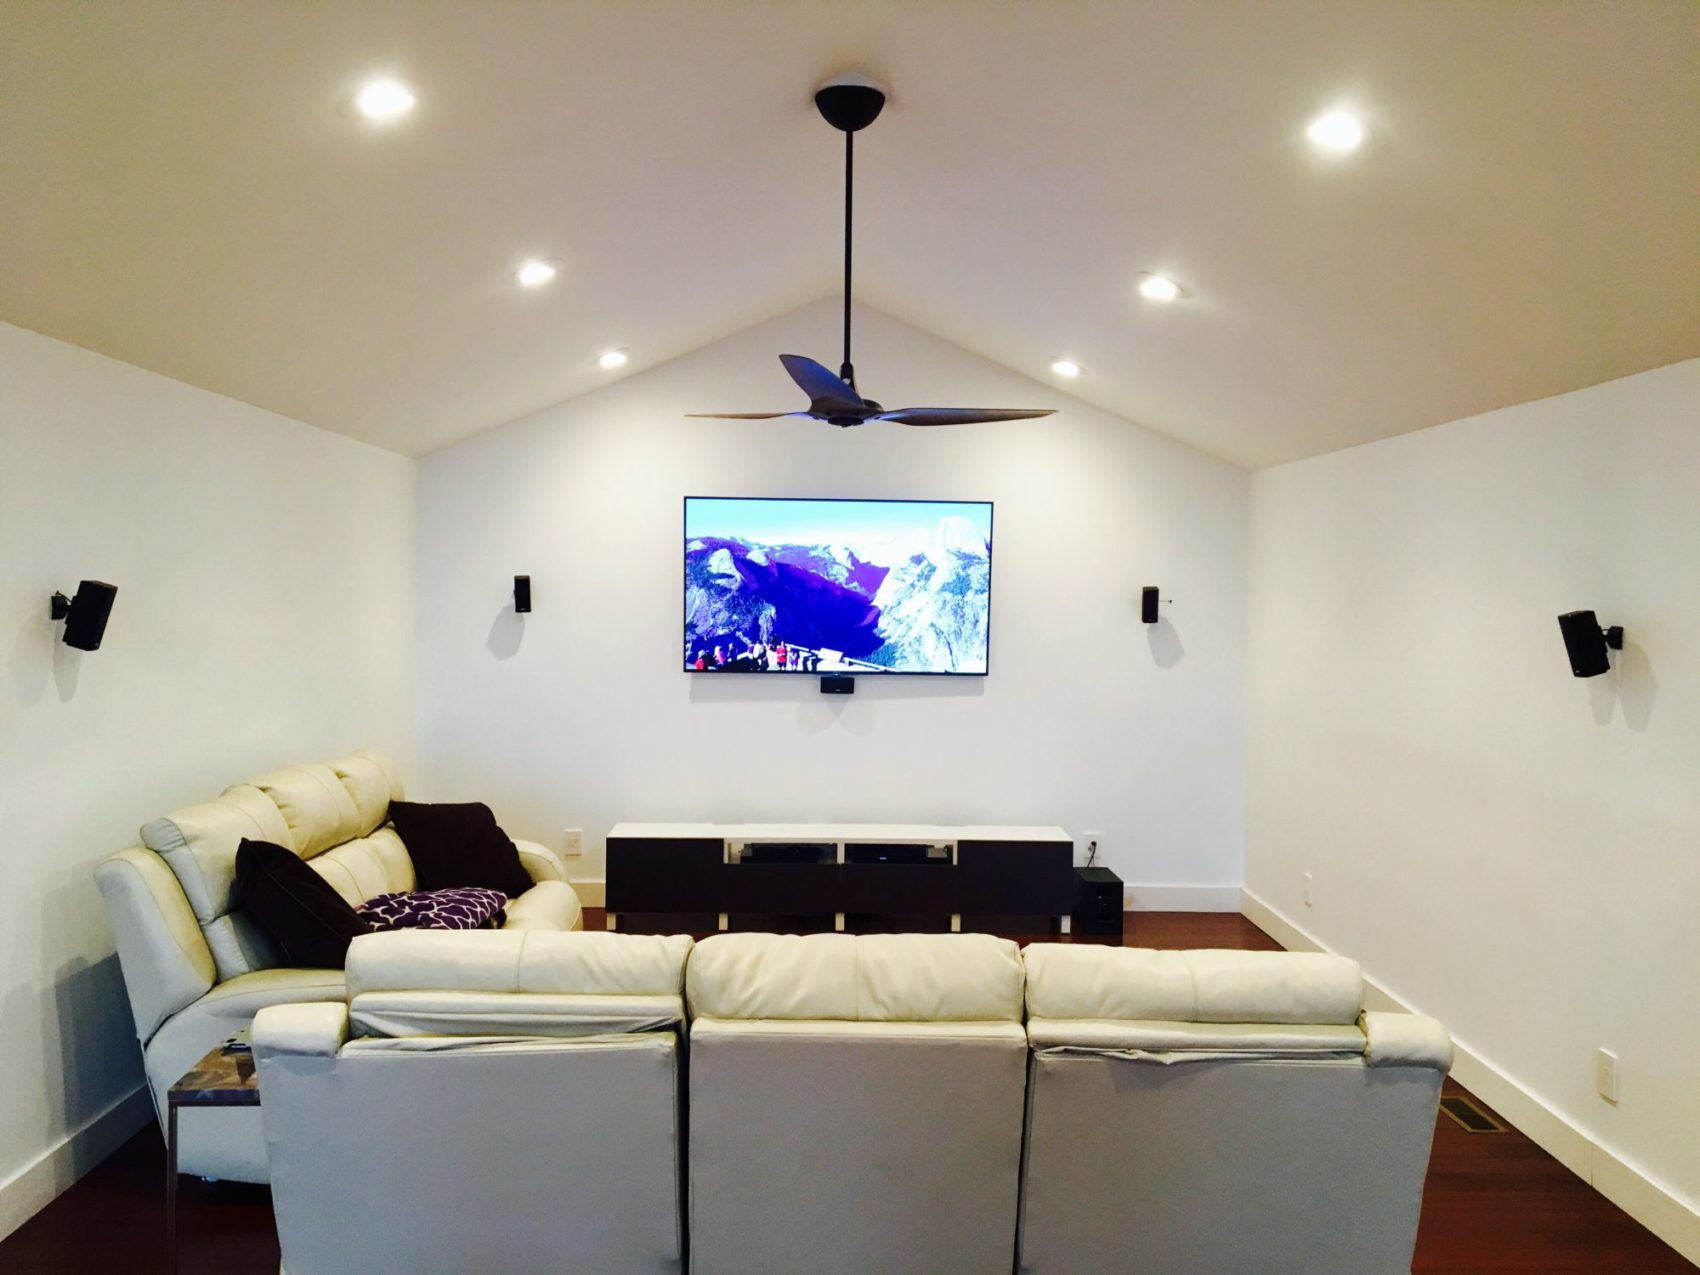 Creatice How To Install Home Theater for Small Space